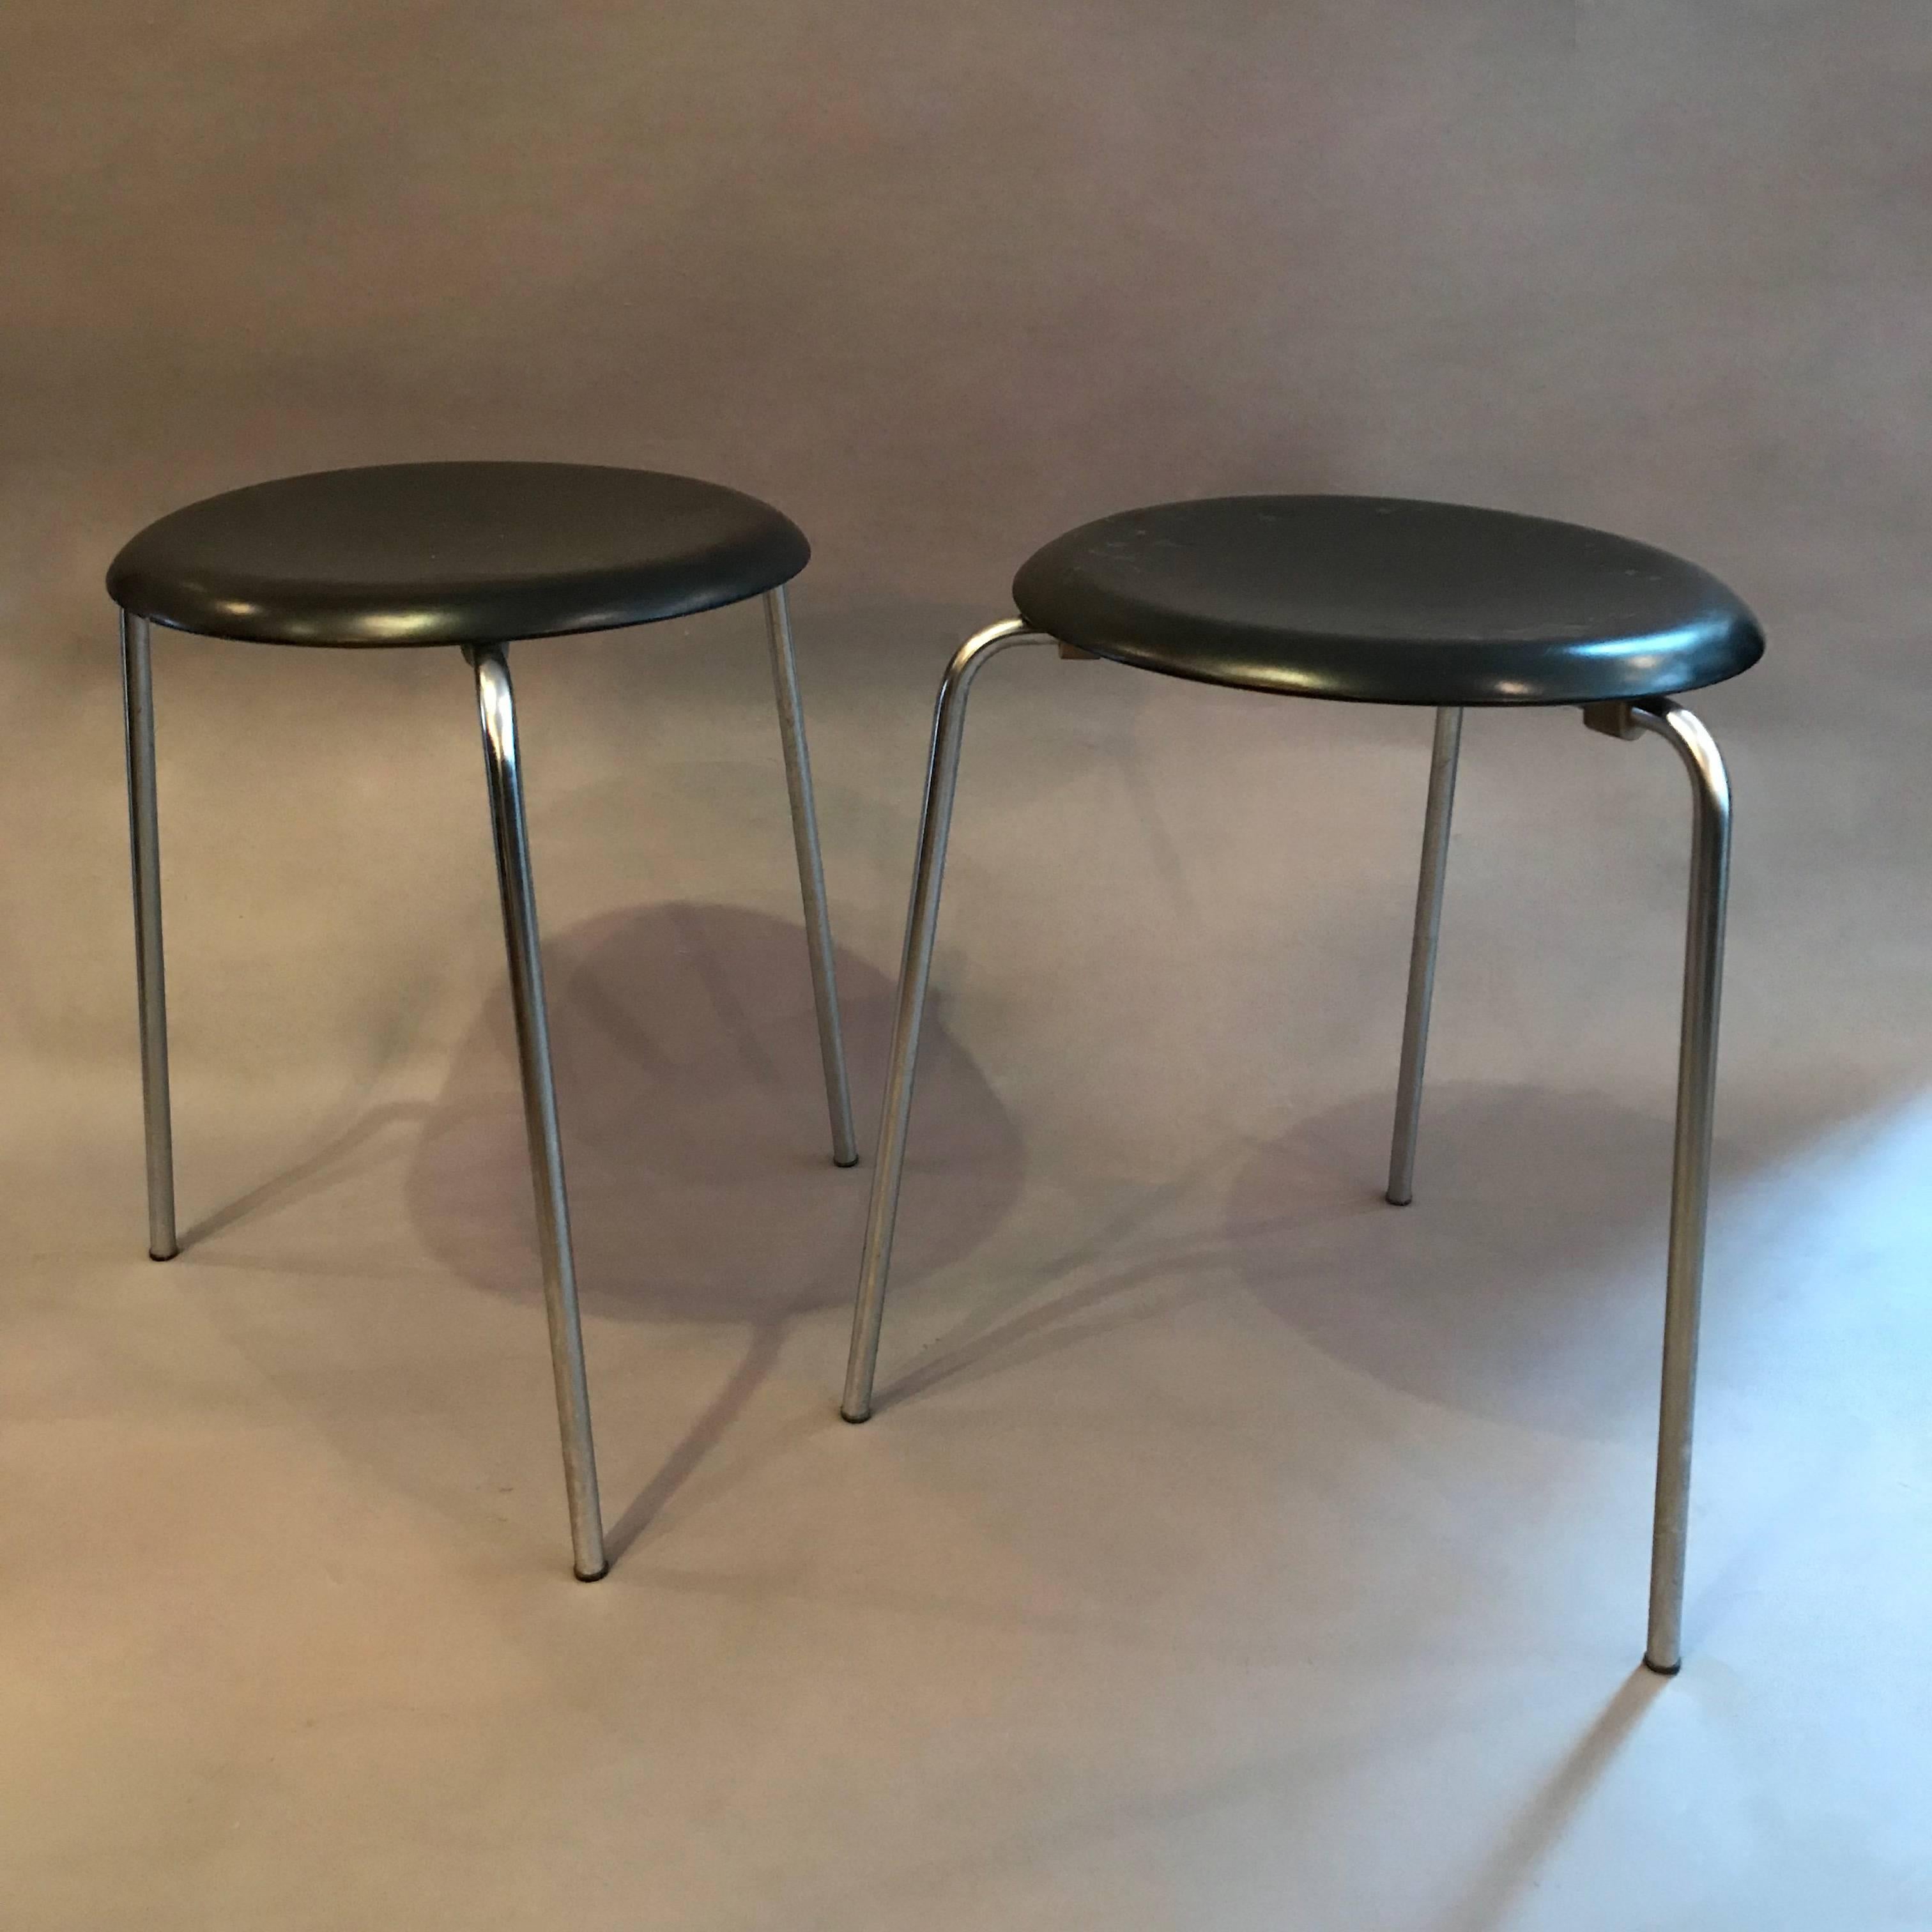 Pair of Danish modern, stacking, Dot stools by Arne Jacobsen for Fritz Hansen features nickel-plated tubular steel legs and a black lacquered, molded wood, 13 in diameter seats.